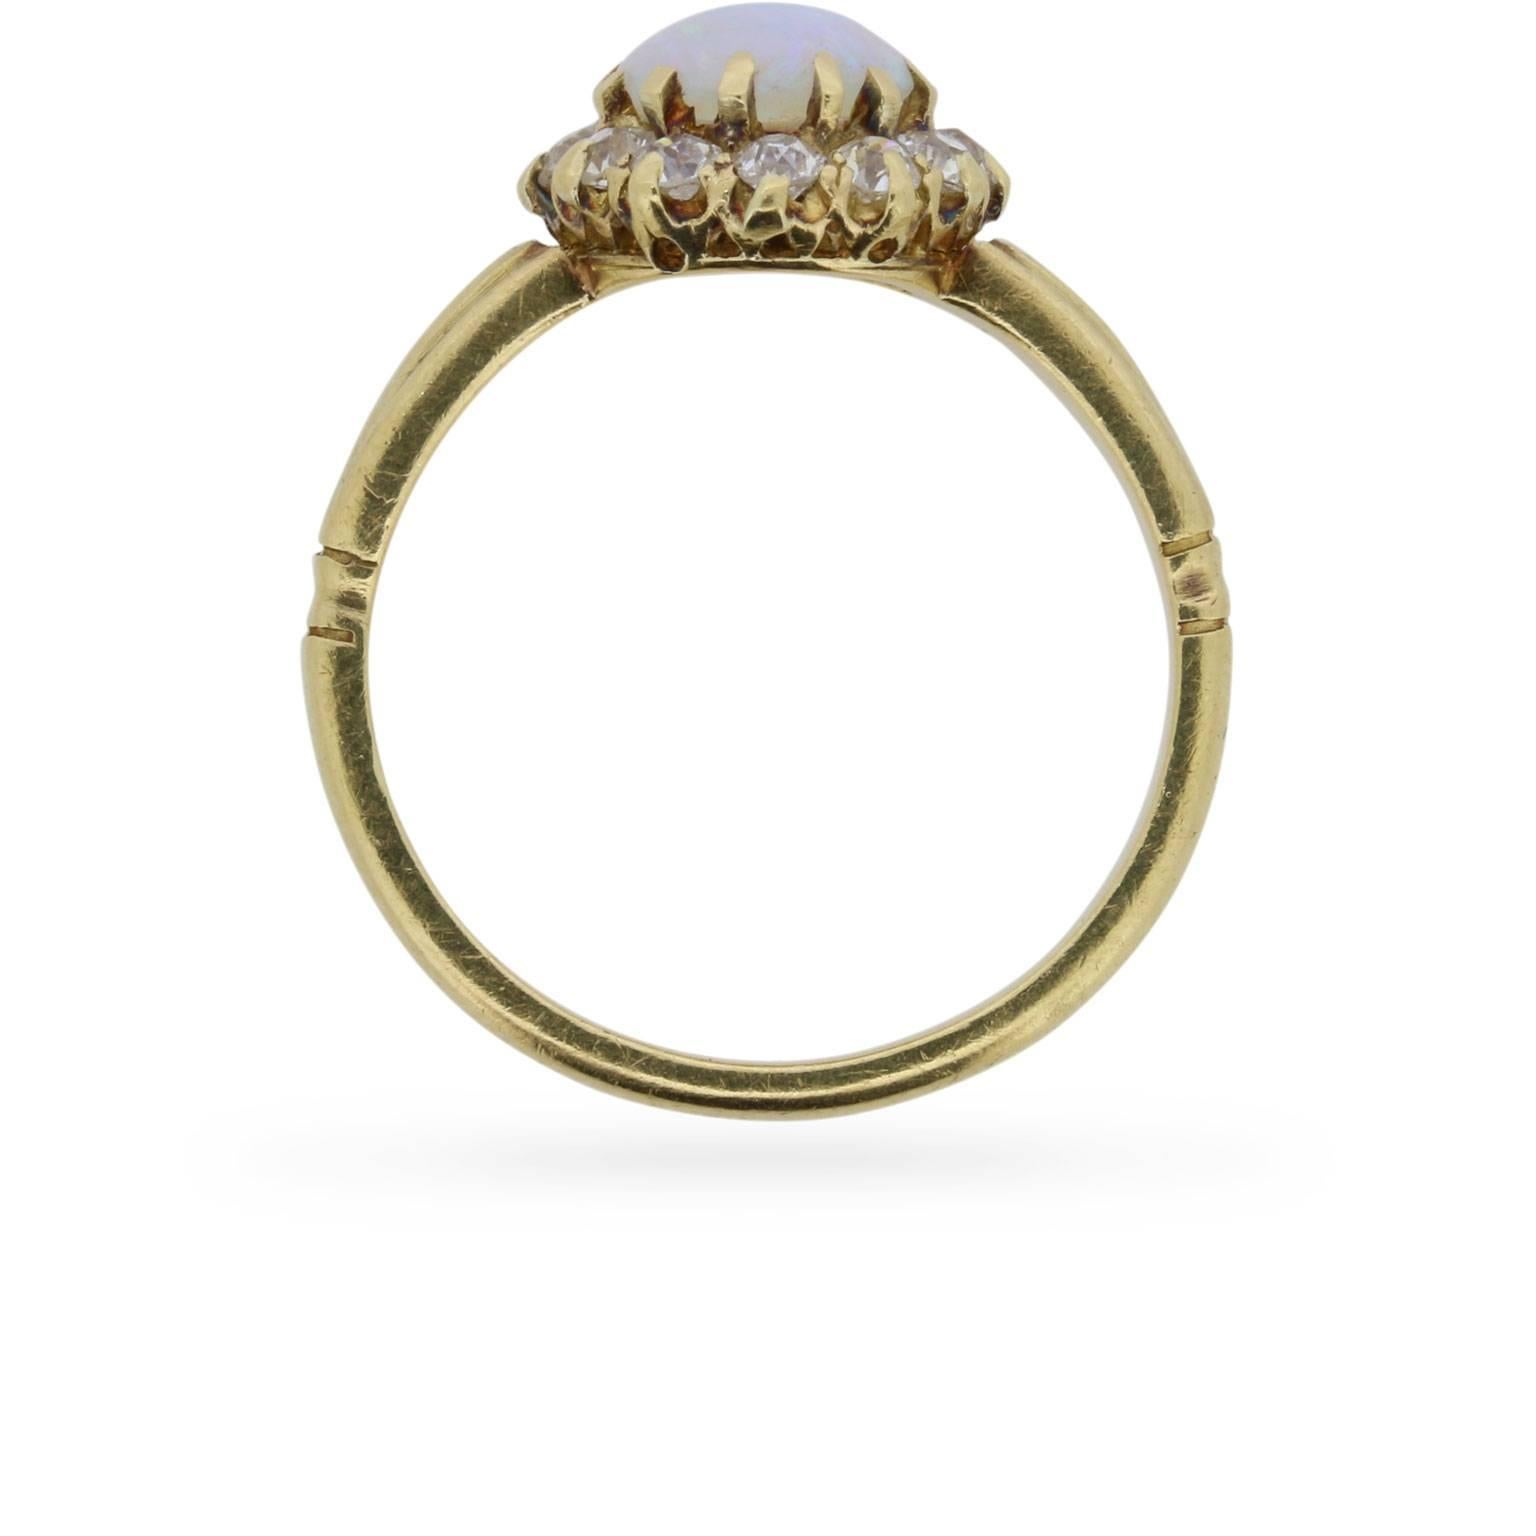 This original Victorian era opal and diamond cluster ring centres a dreamy opal cabochon within a sparkling halo of old cut diamonds.

Its antique 18 carat yellow gold setting was handcrafted in the coronet style during the 1880s with fluted